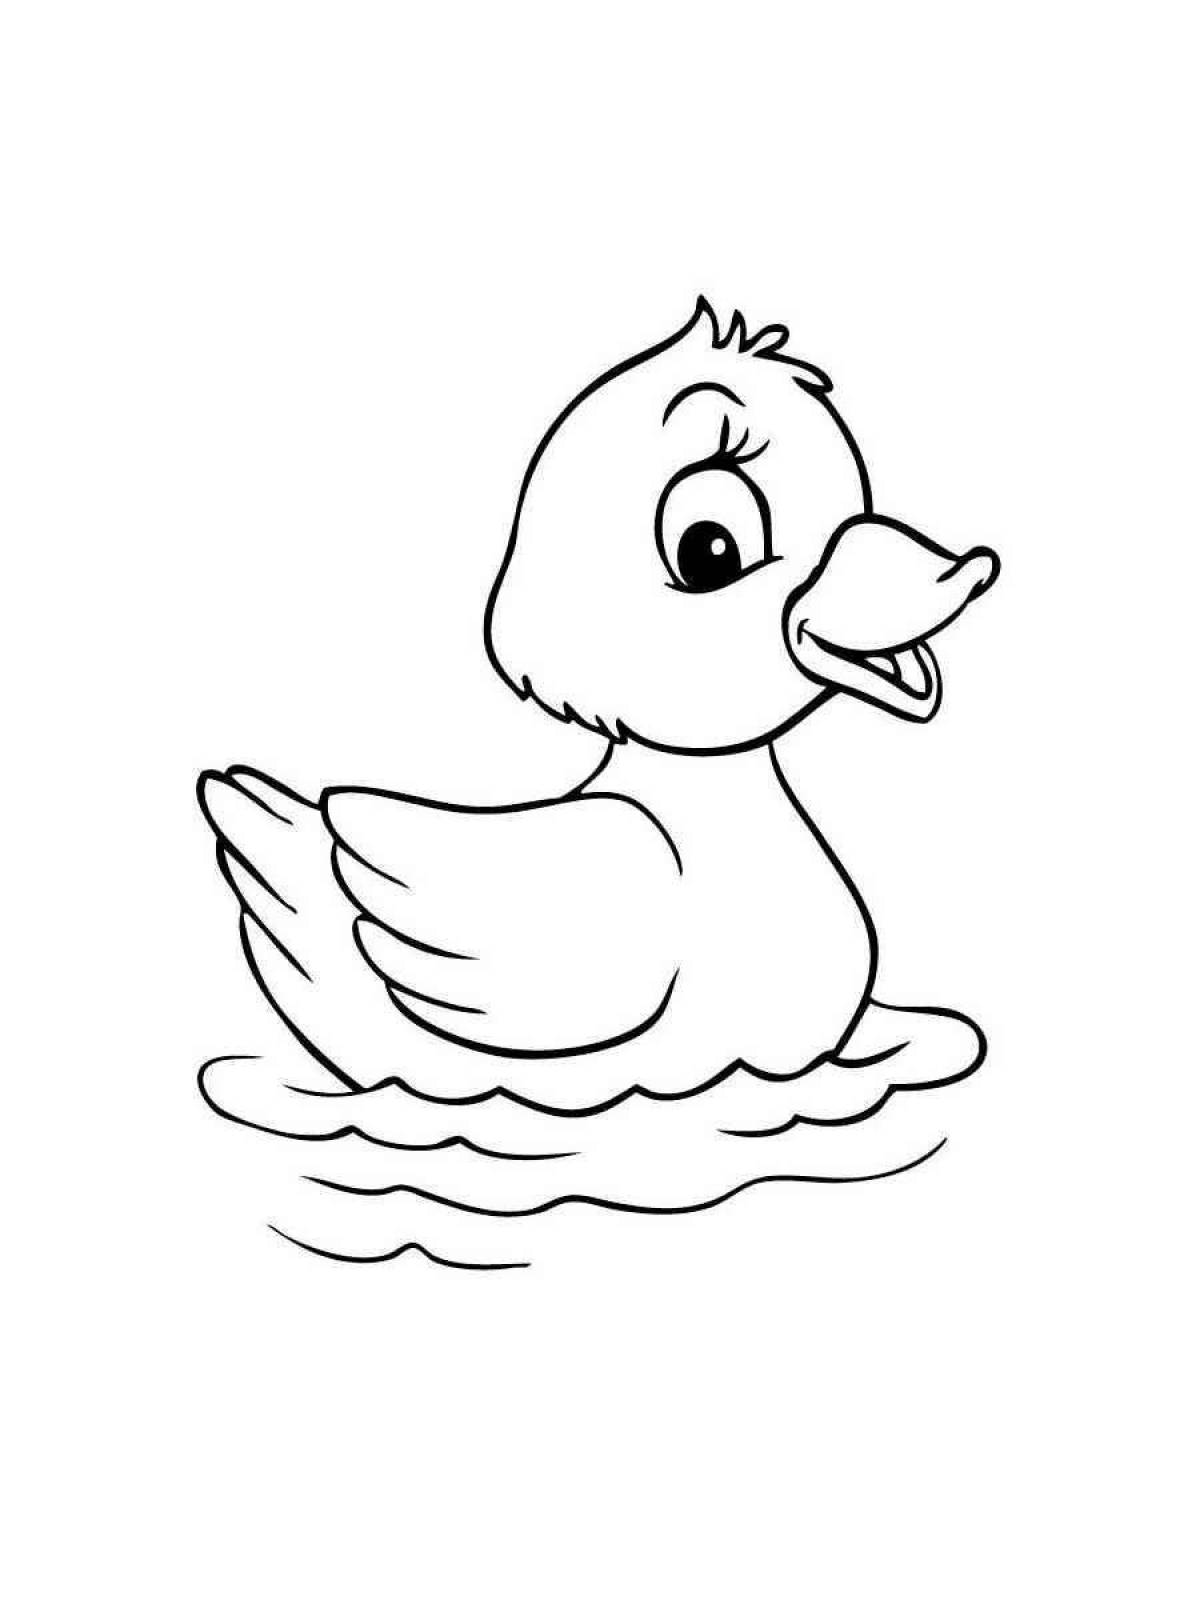 Colorful lalanfant duck coloring page